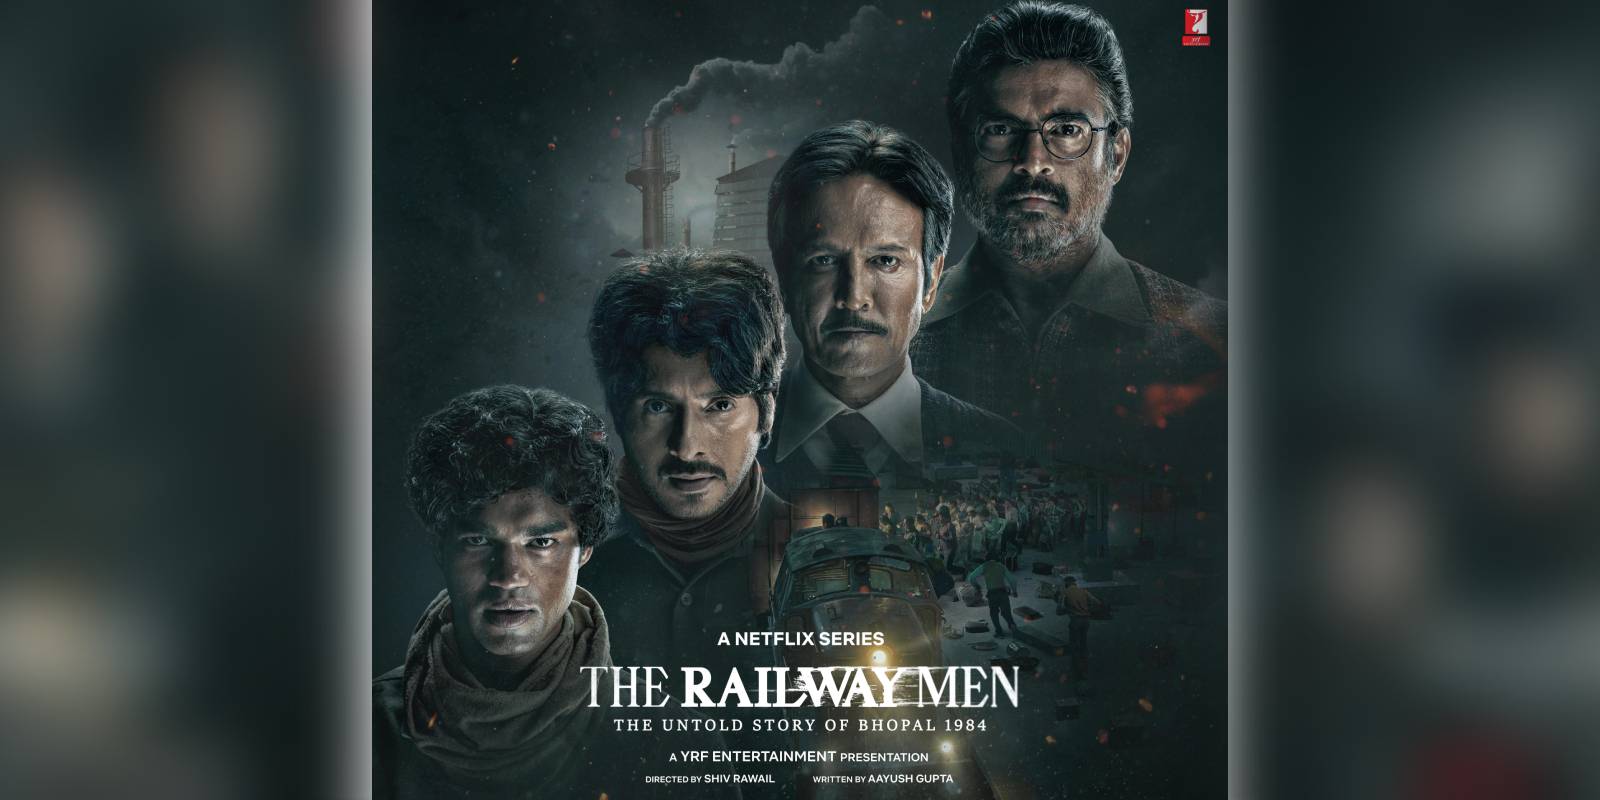 A poster of the web series The Railway Men